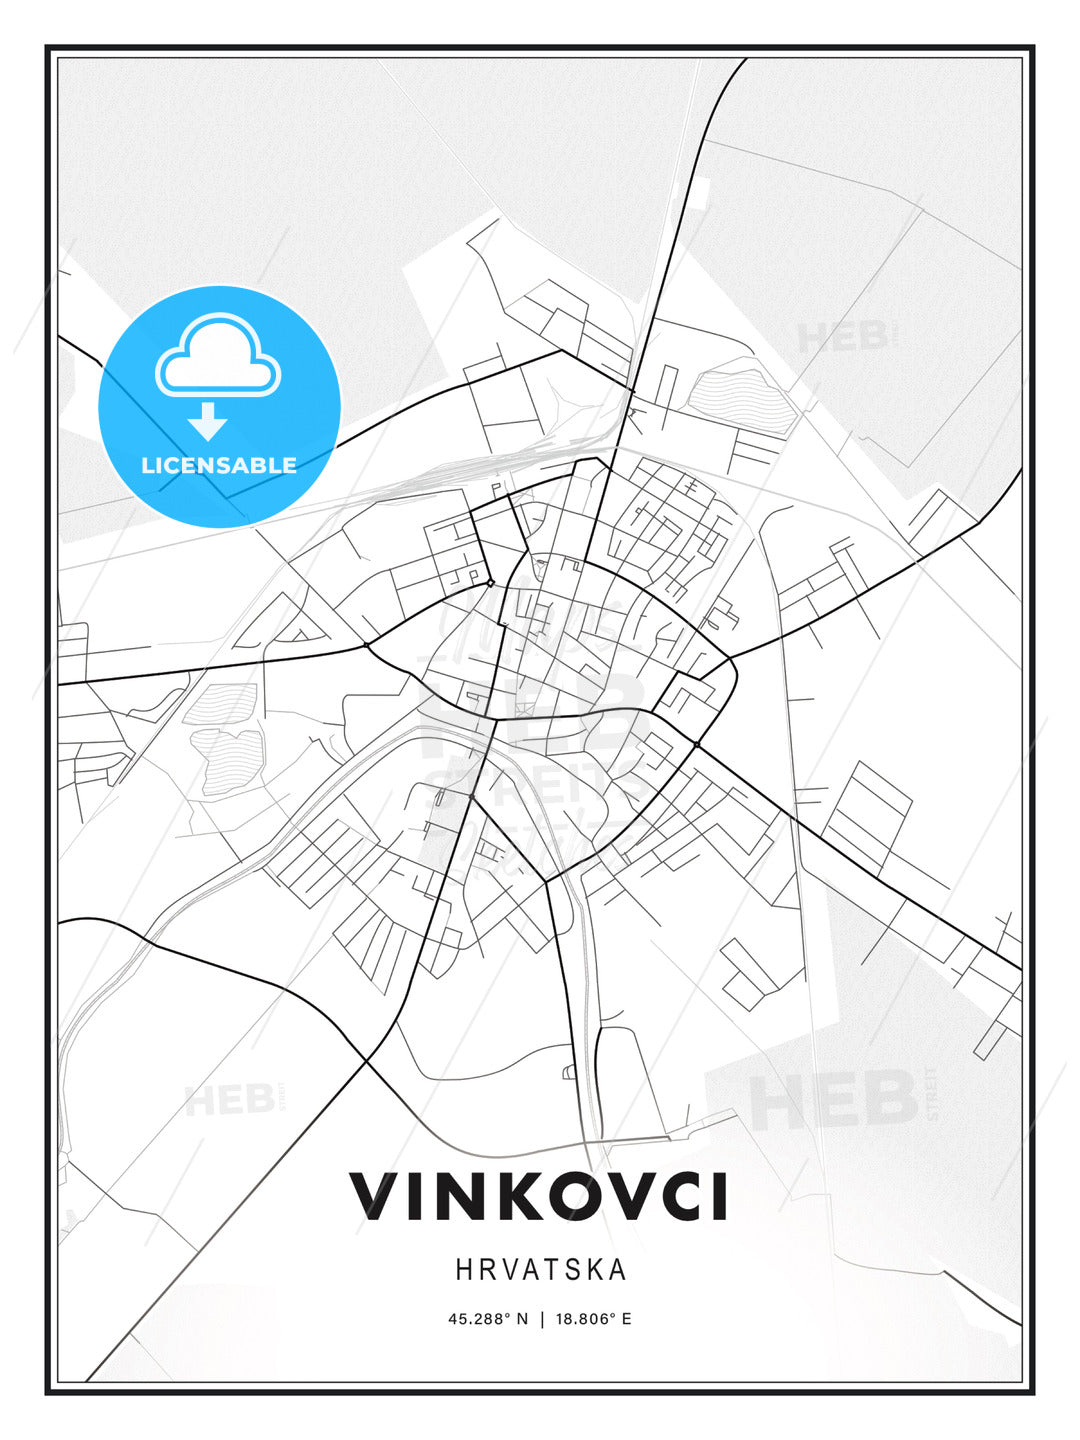 Vinkovci, Croatia, Modern Print Template in Various Formats - HEBSTREITS Sketches